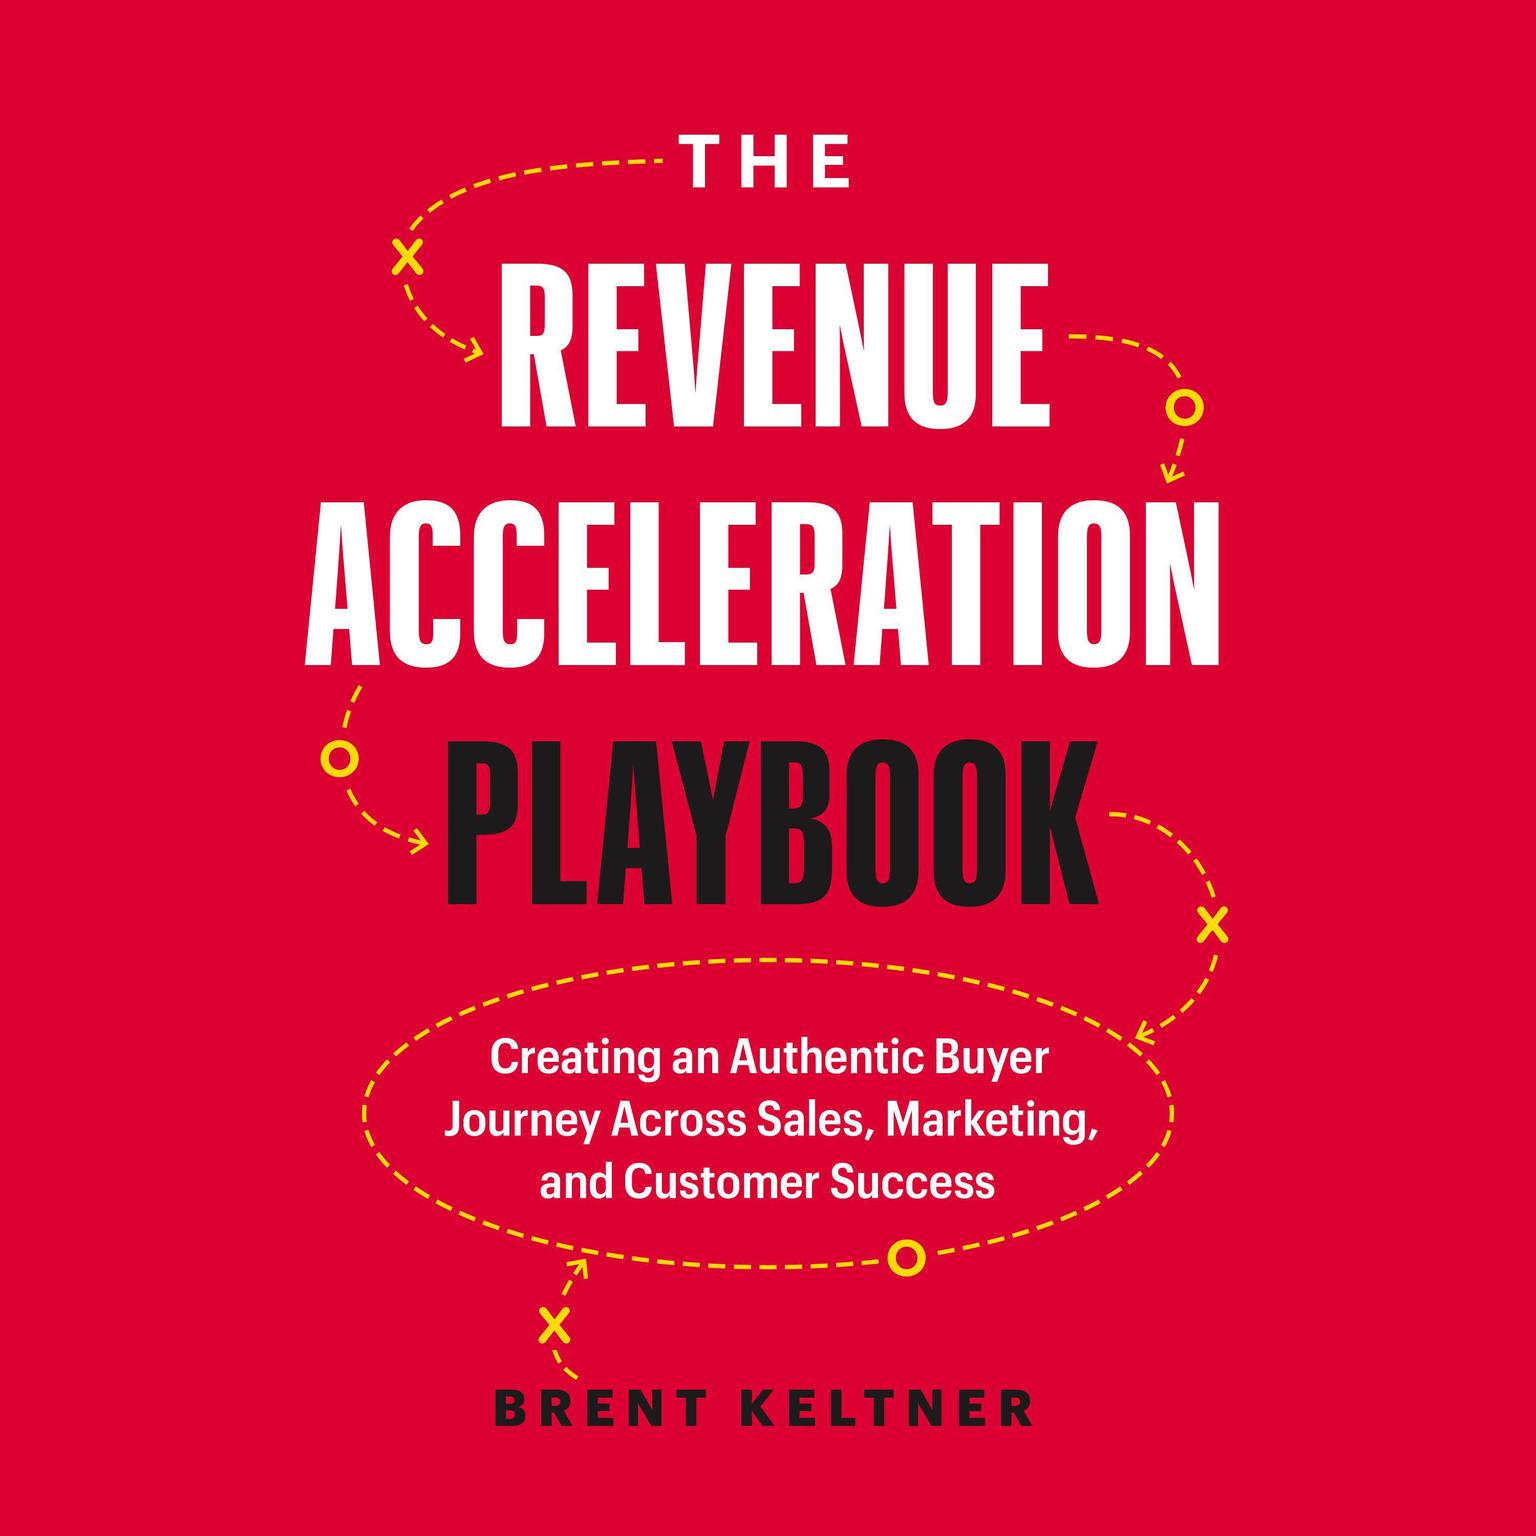 The Revenue Acceleration Playbook: Creating an Authentic Buyer Journey Across Sales, Marketing, and Customer Success Audiobook, by Brent Keltner